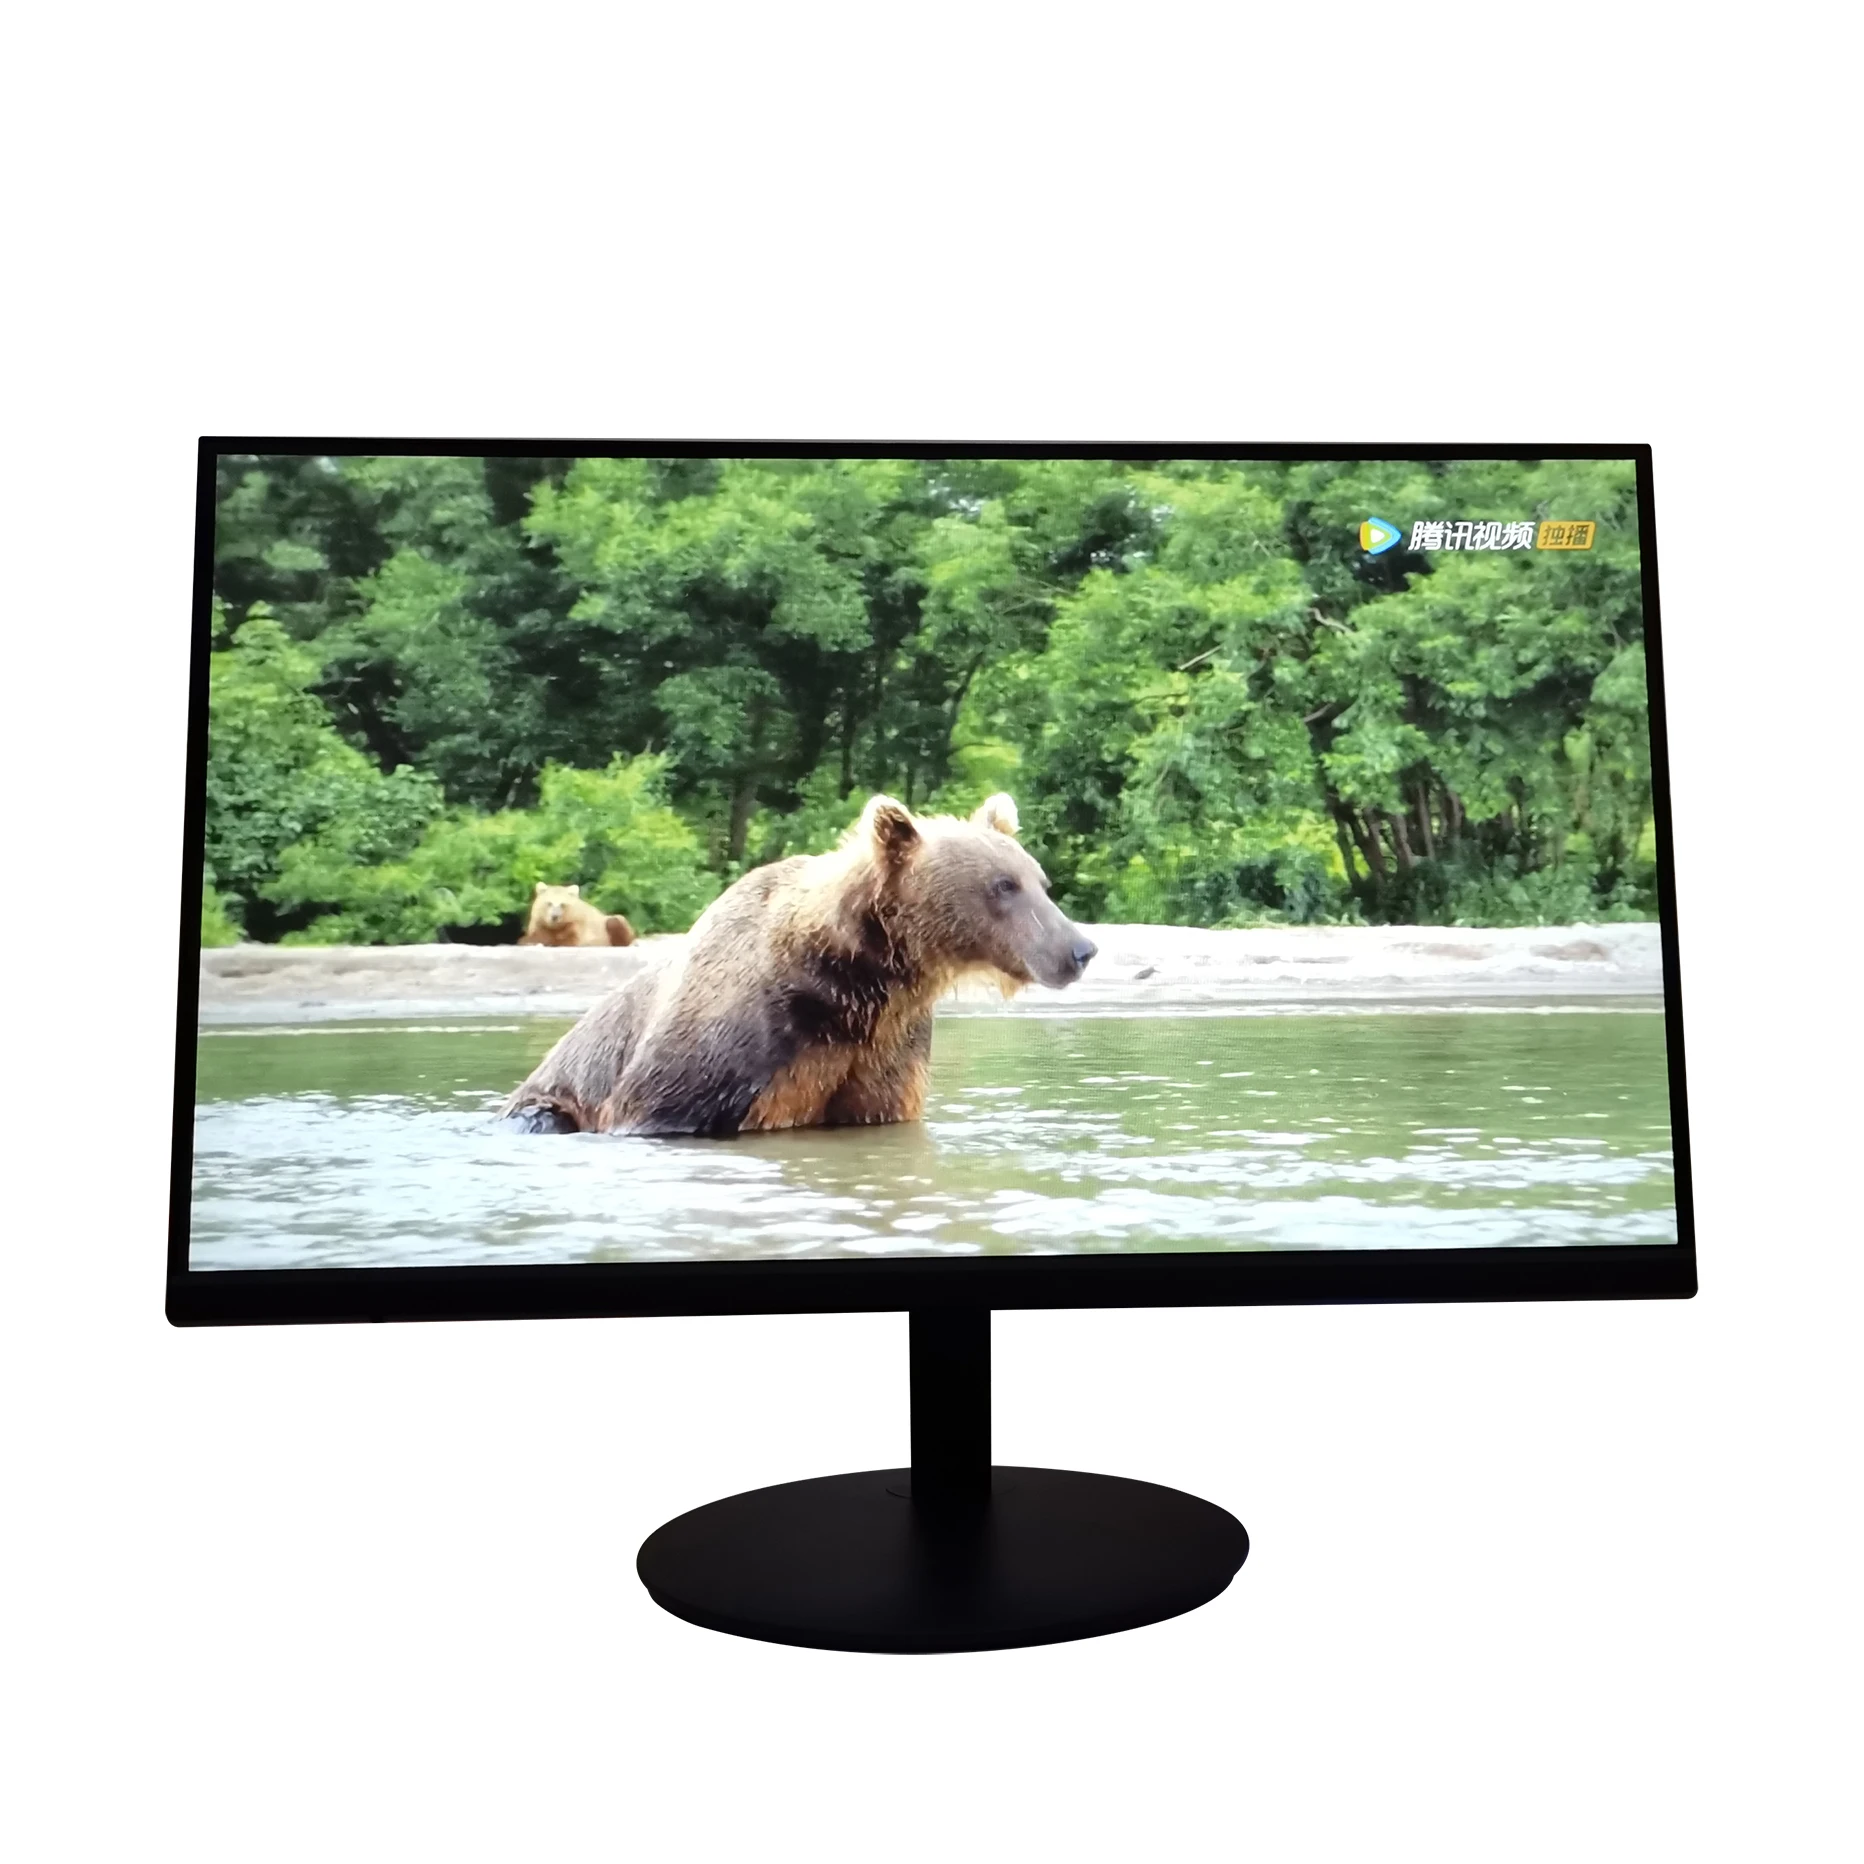 

Desktop monitors LCD Computer Monitor 17inch, 19inch 21.5 23.8 27 32 inch FHD IPS frameless monitor for business